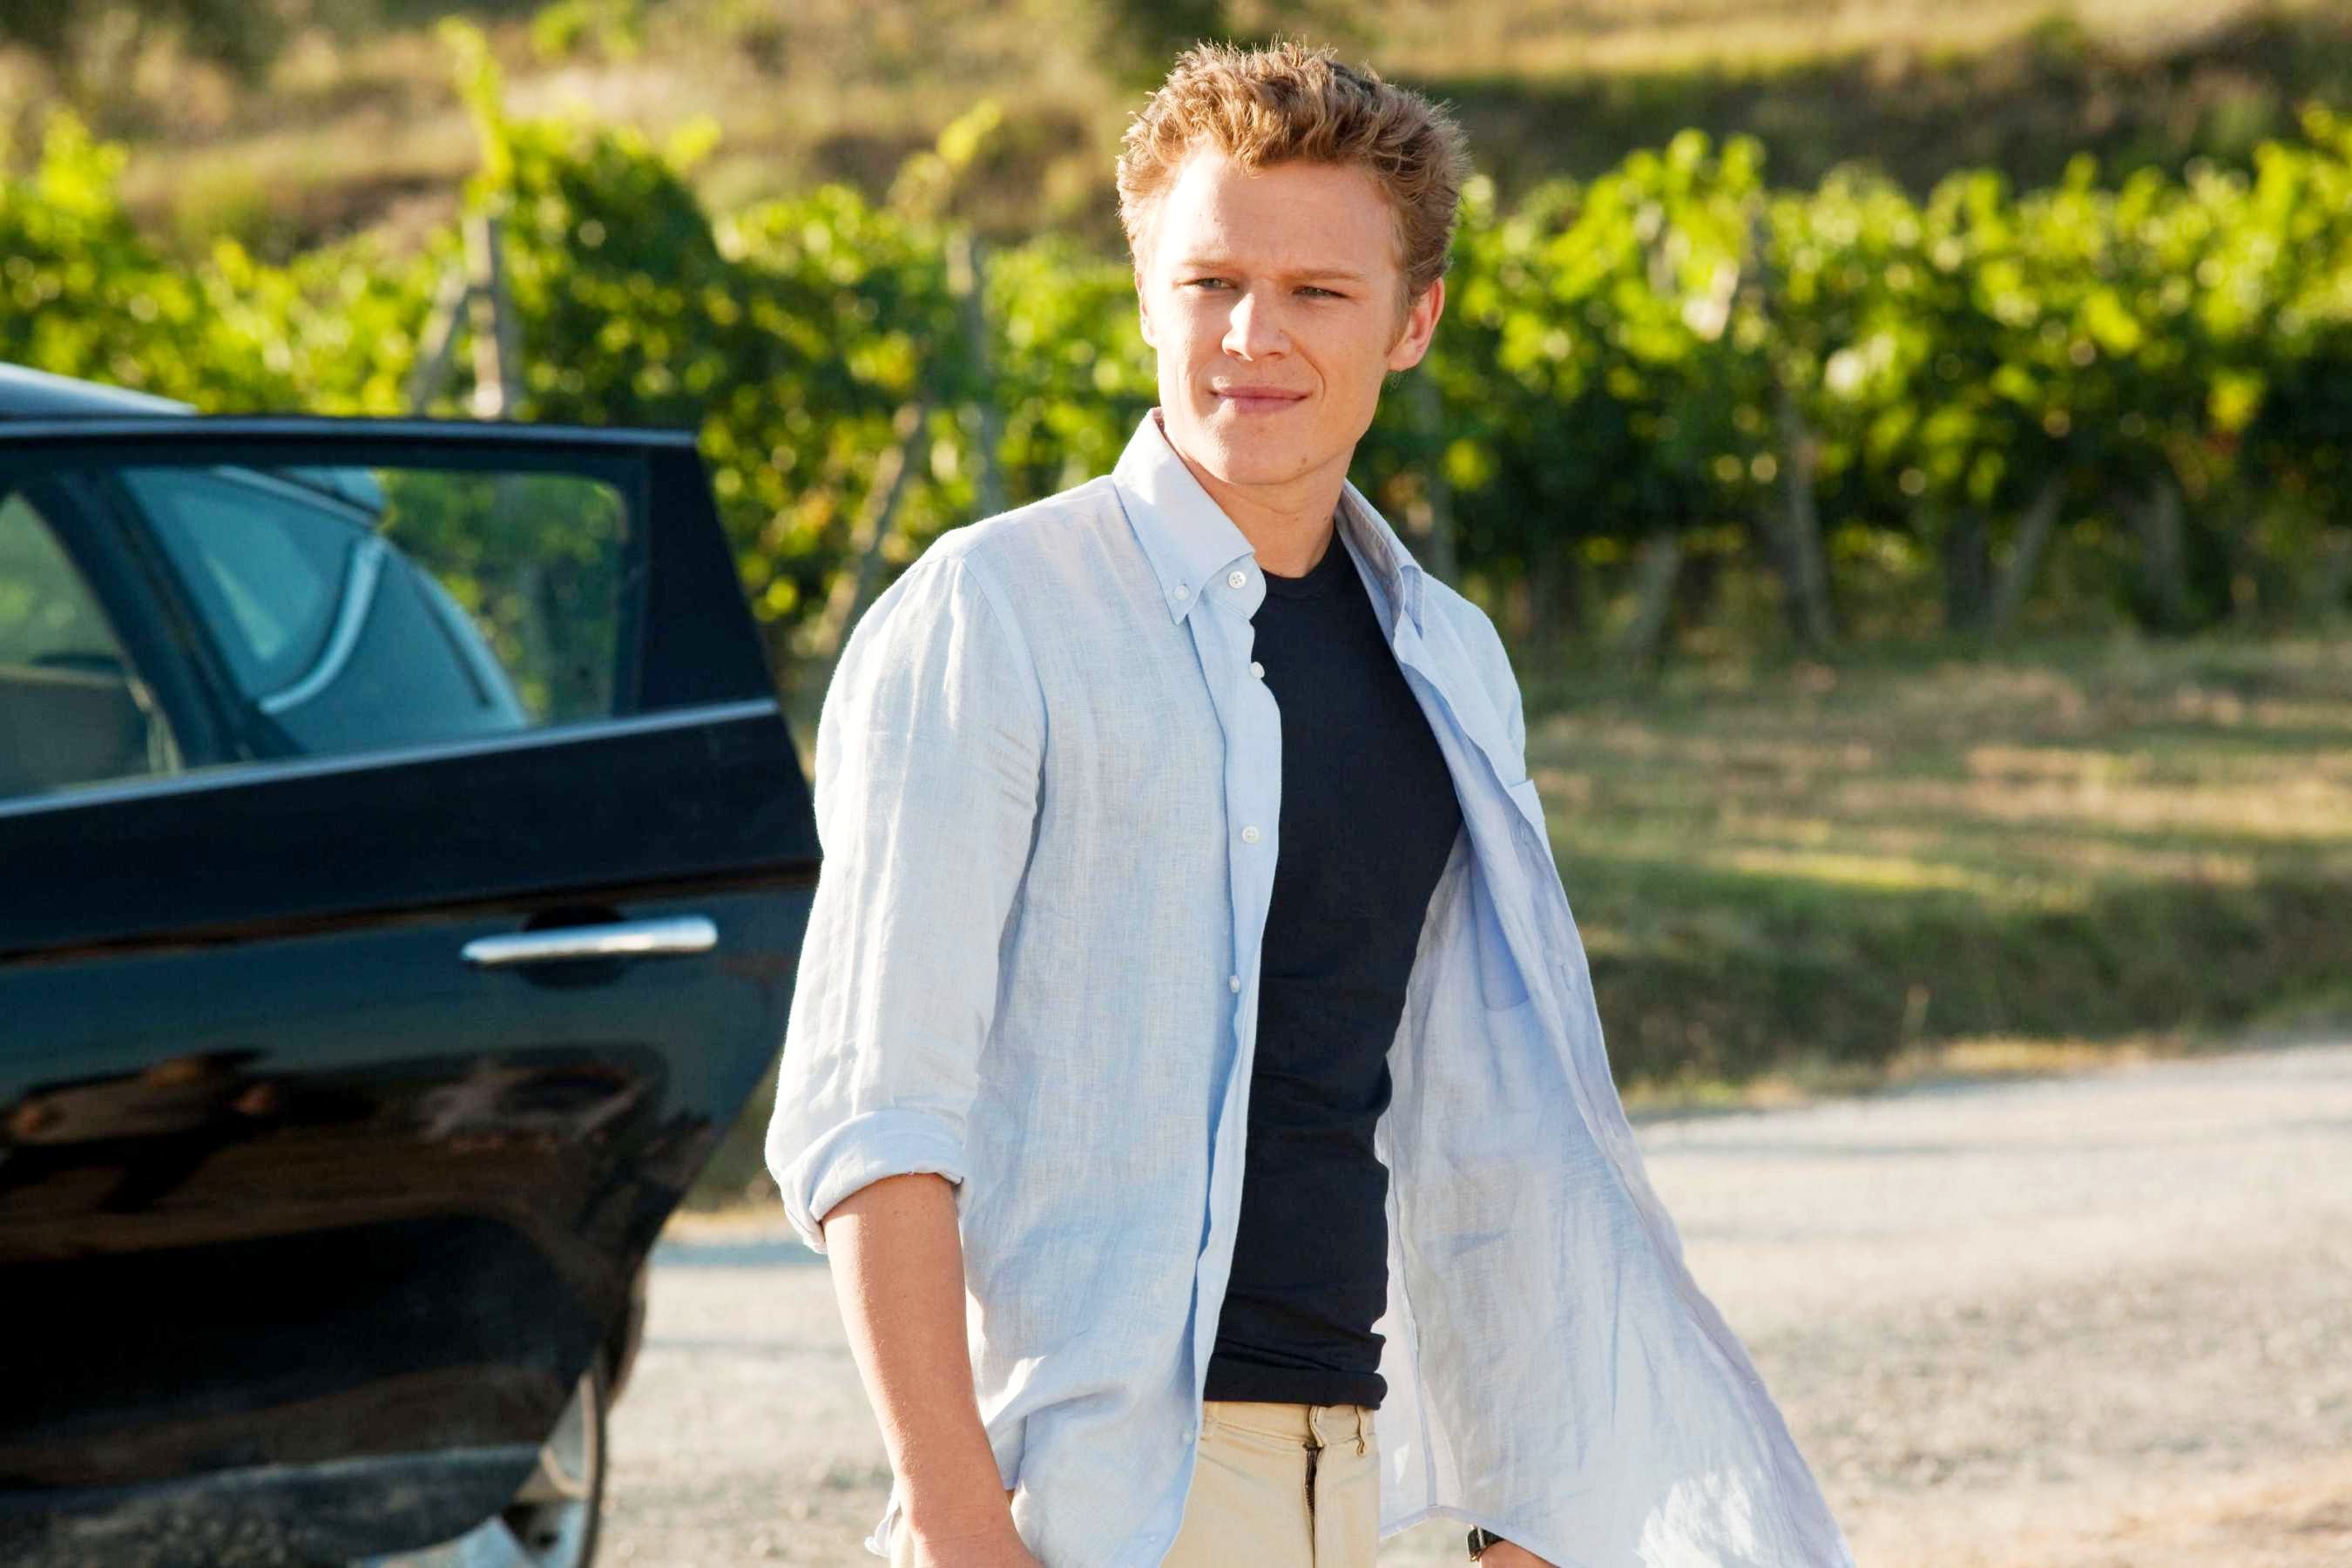 Christopher Egan stars as Charlie Wyman in Summit Entertainment's Letters to Juliet (2010). Photo credit by John Johnson.